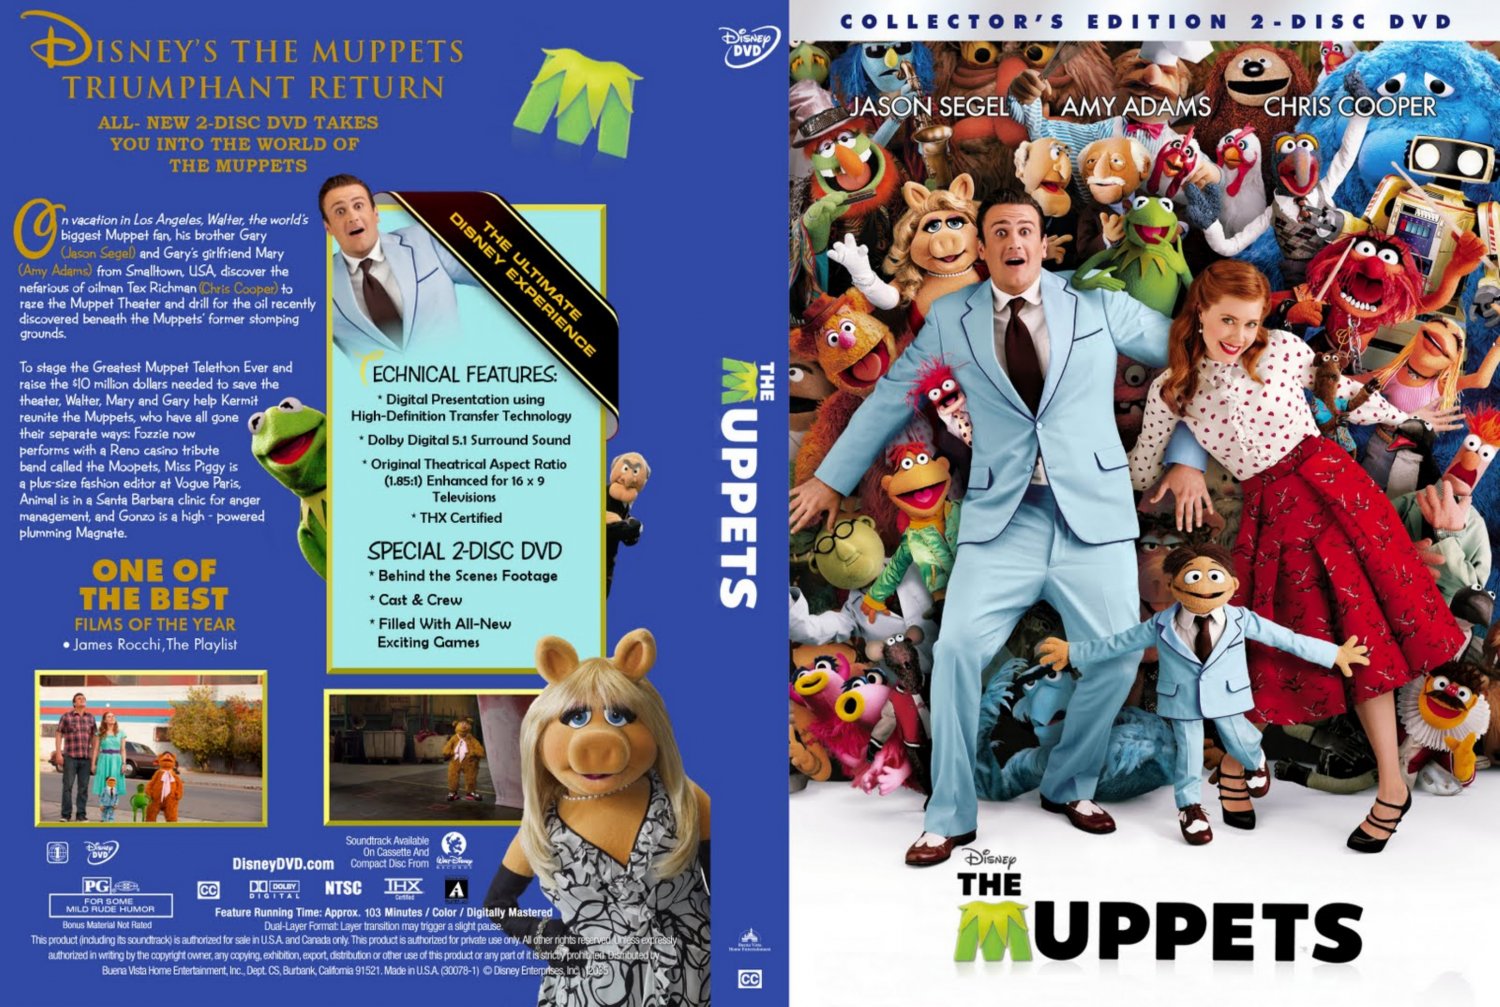 The Muppets Movie Dvd Custom Covers The Muppets Dvd Covers